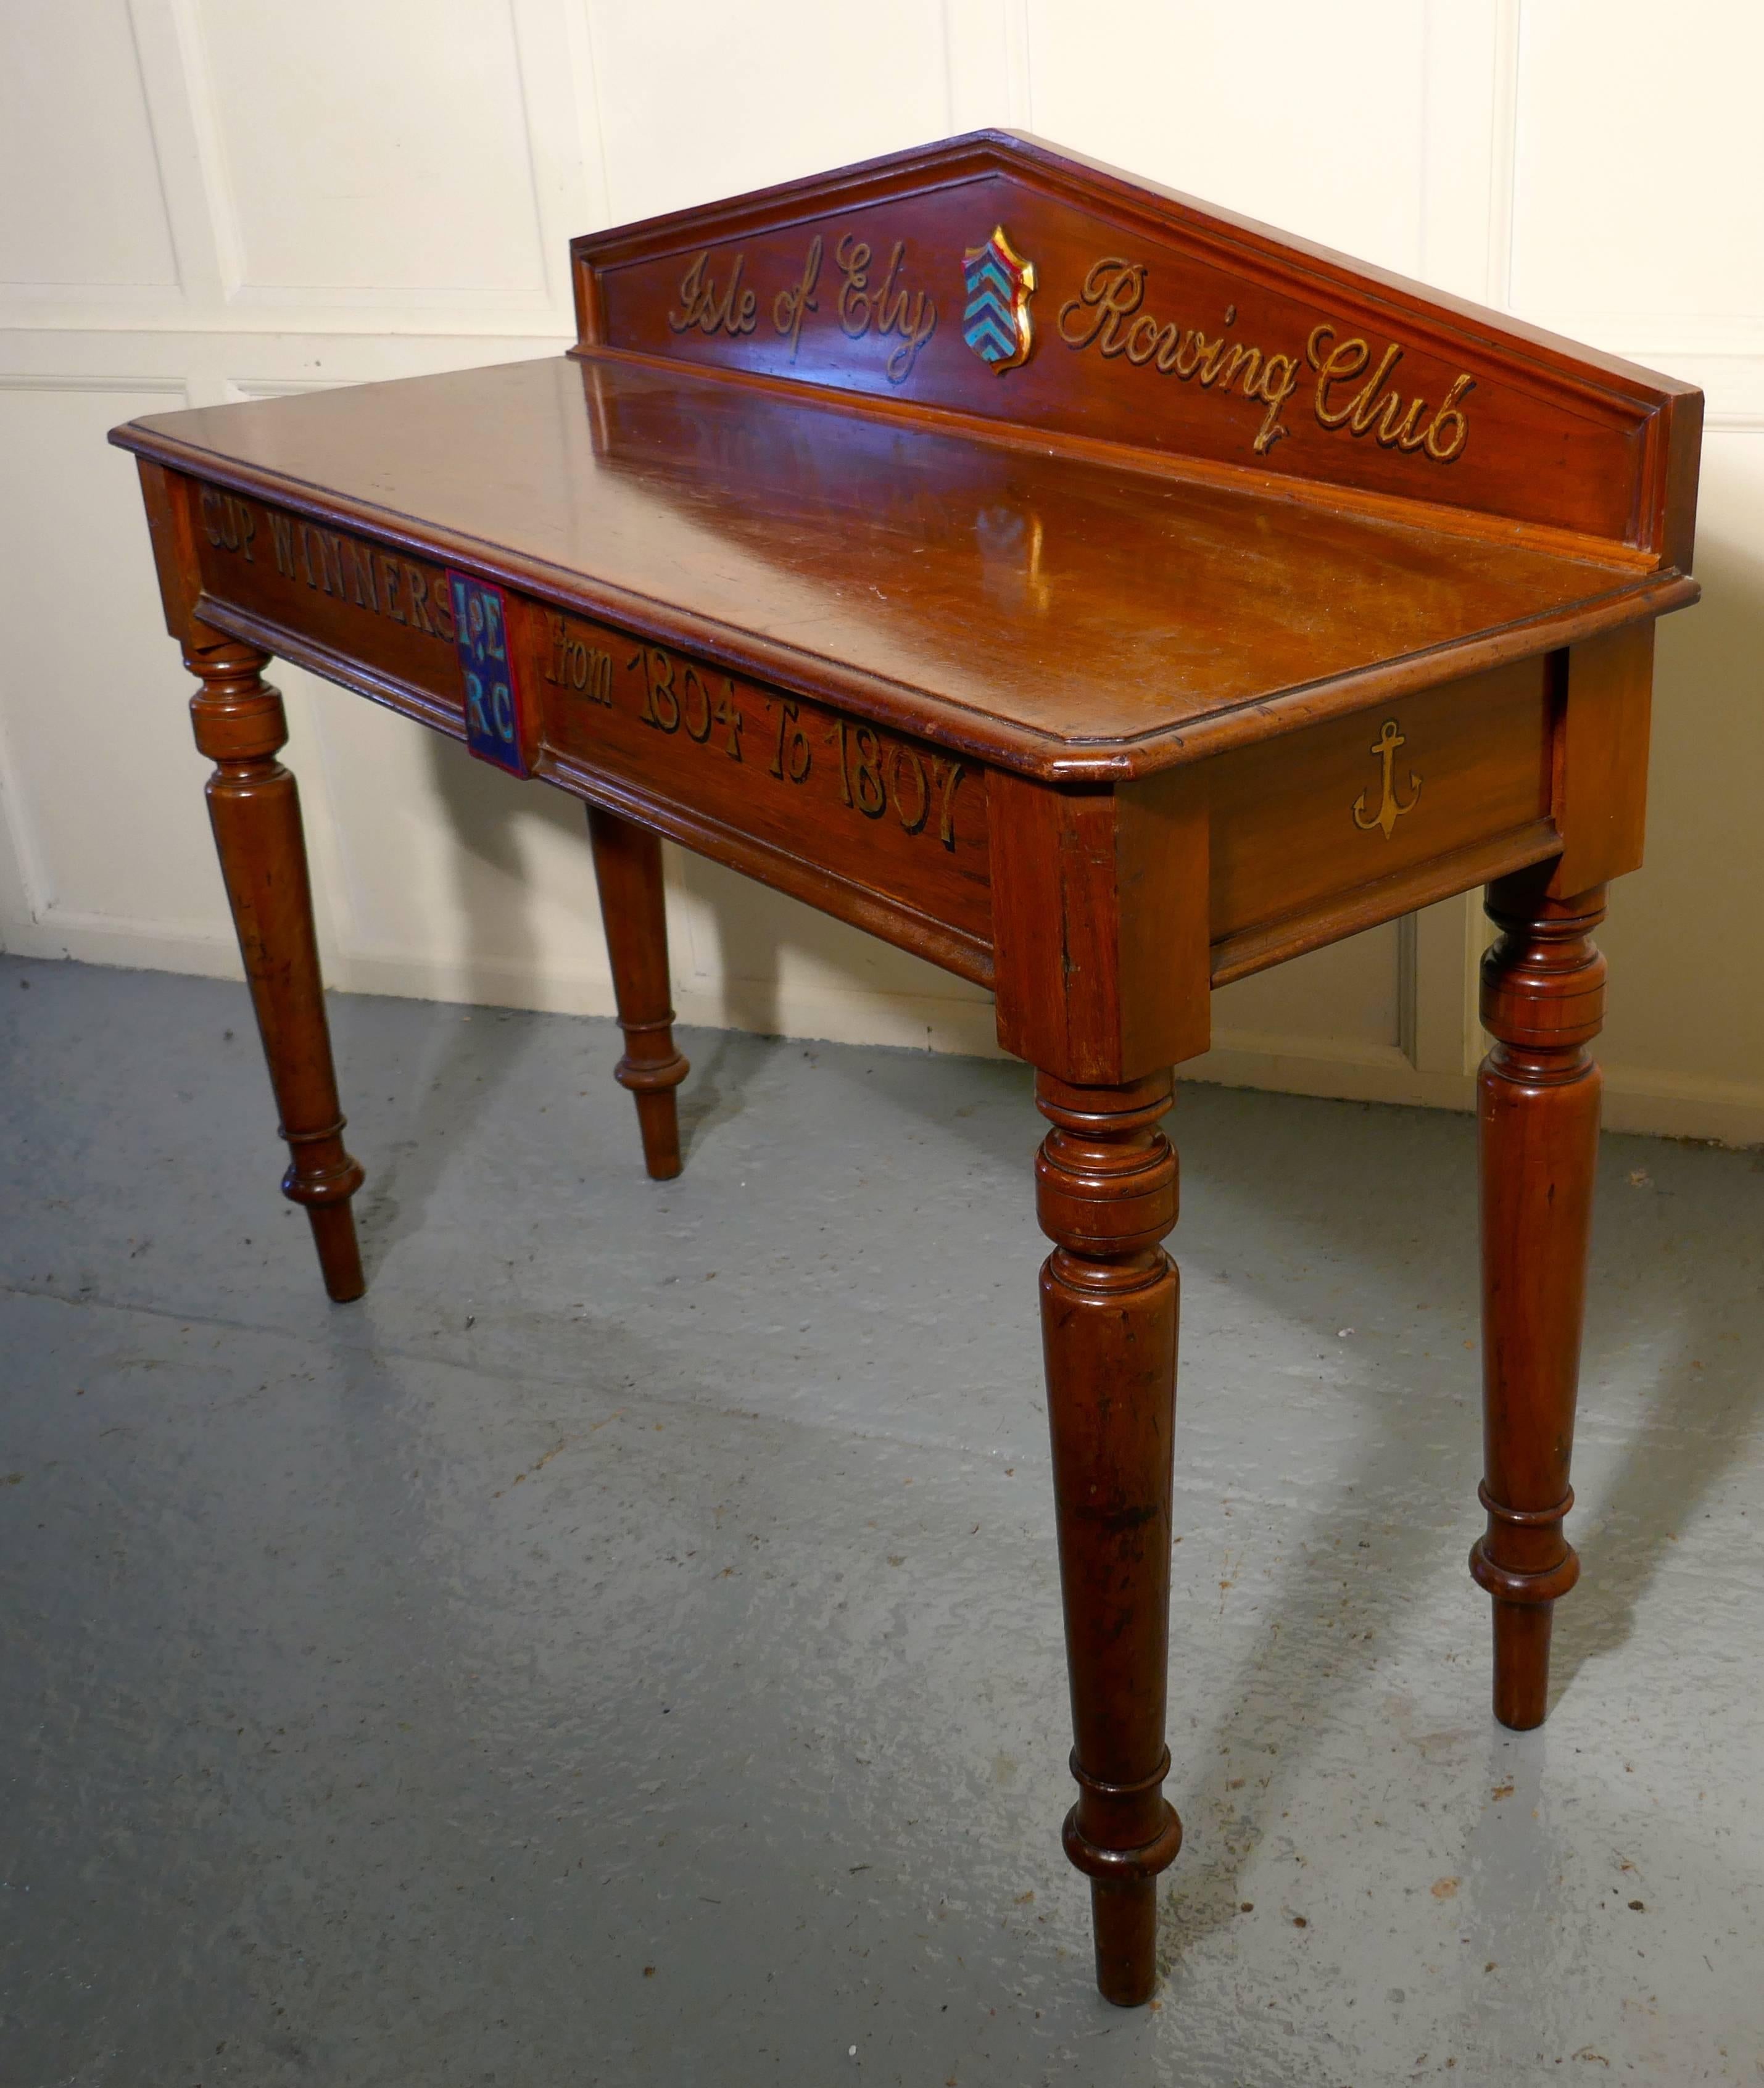 Rowing club trophy table

A Victorian mahogany side table from “TheIsle of Ely” rowing club, commemorating the cup winners from 1804 to 1807.

A rare piece with a shield crest painted with chevrons, and gold lettering on the back gallery
The